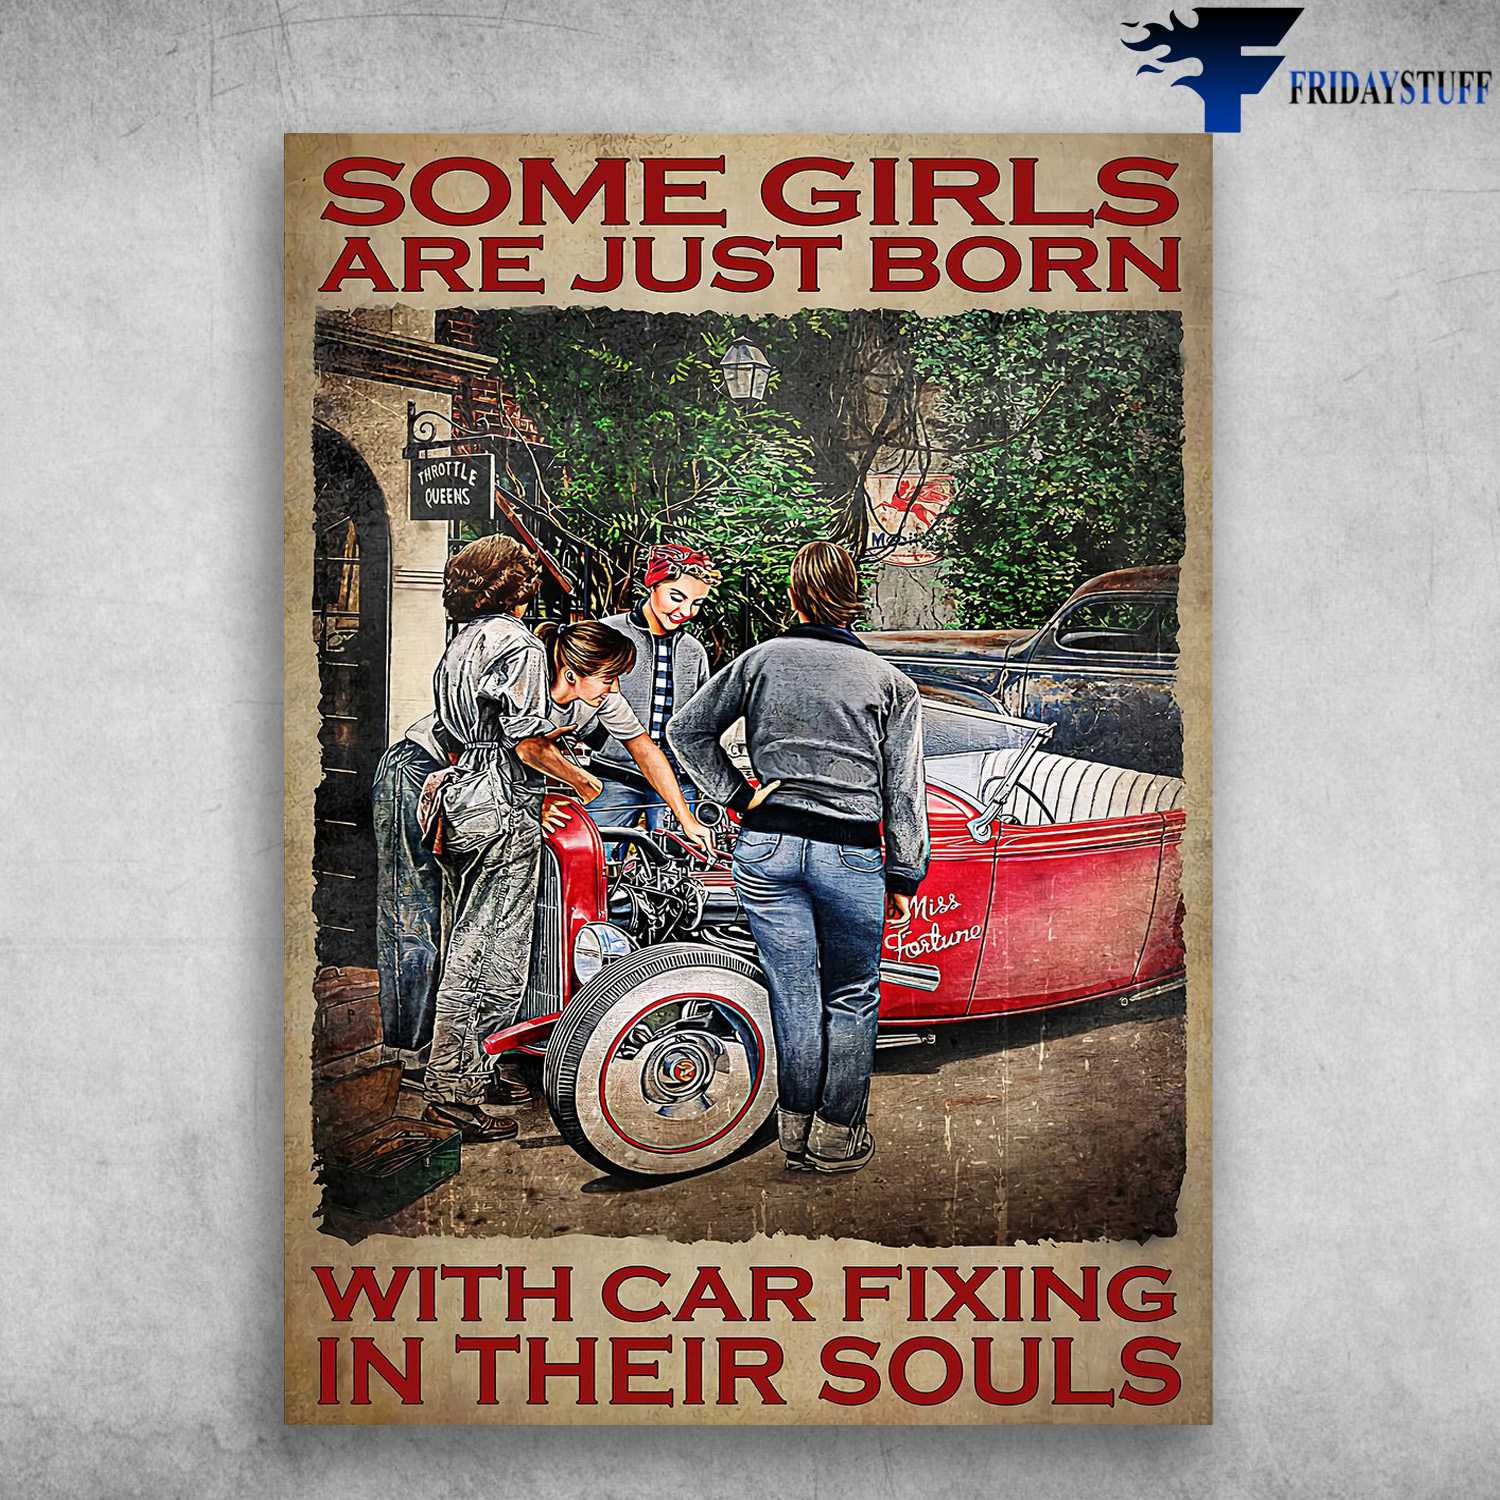 Car Fixing, Car Lover - Some Girls Are Just Born, With Car Fixing In Their Souls